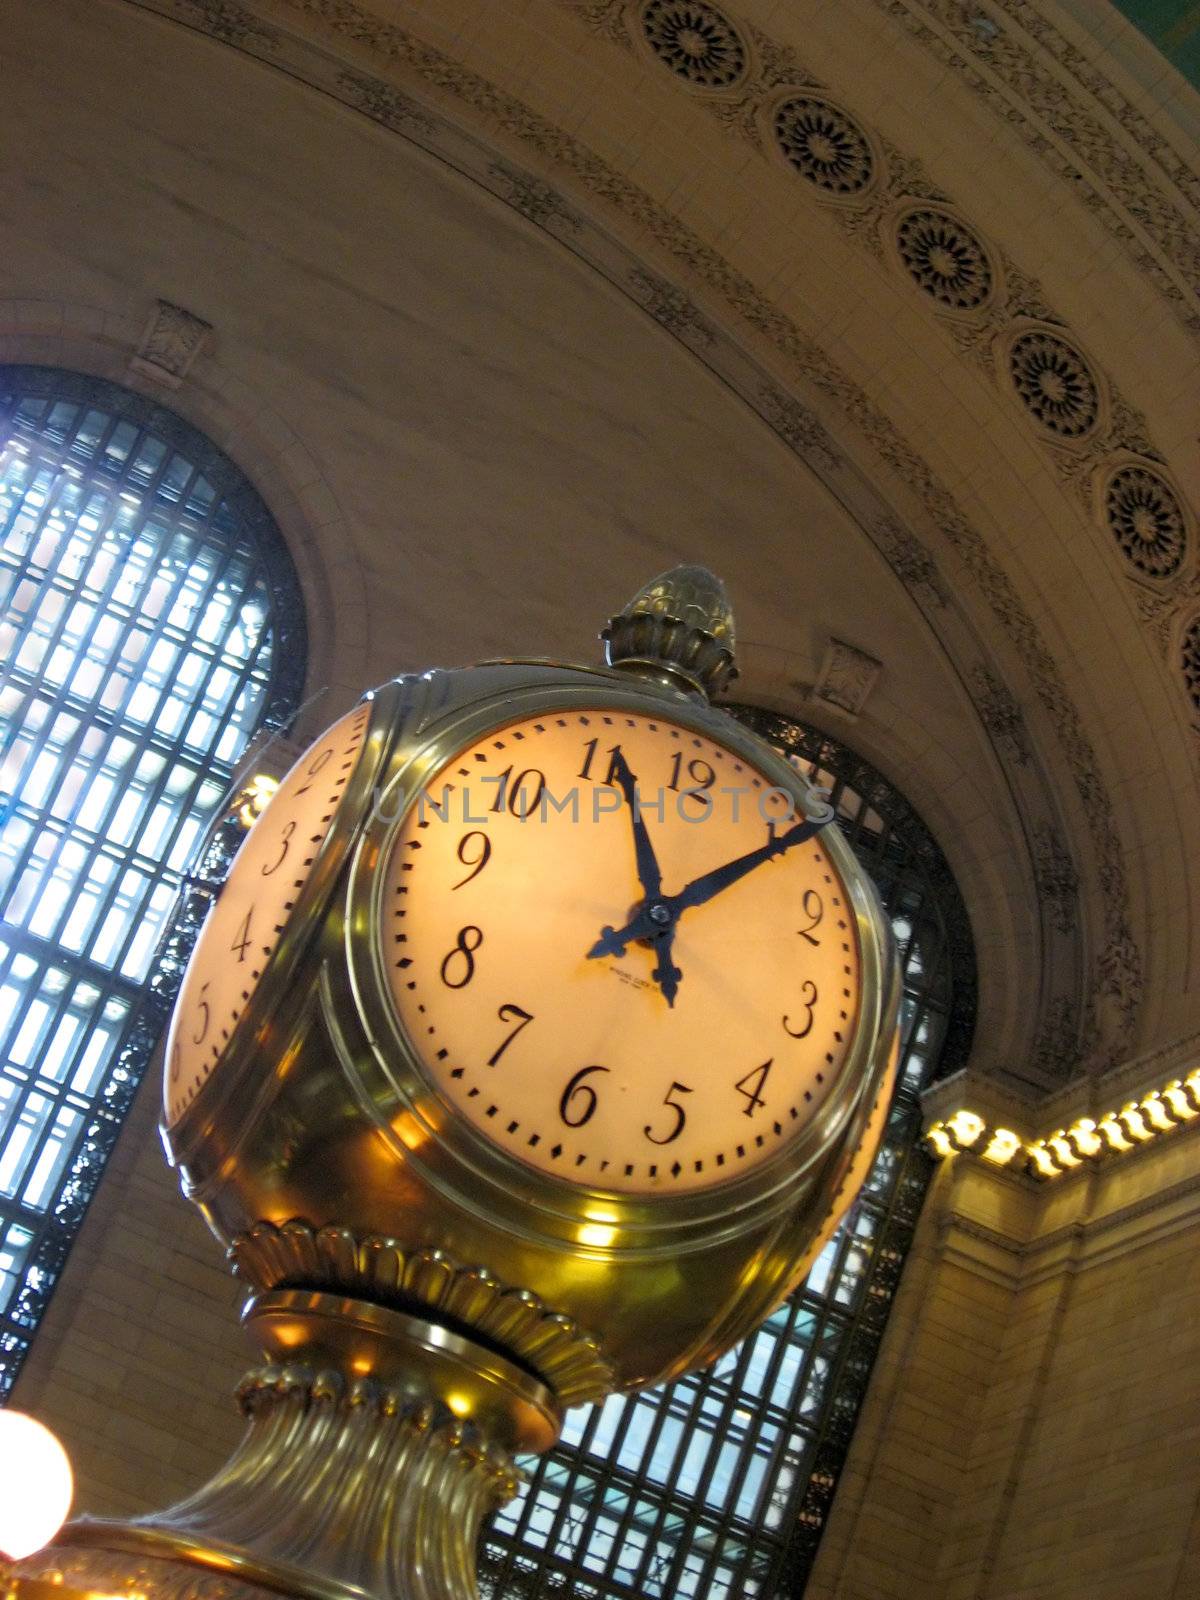 The old clock in the center of grand central station in New York City.